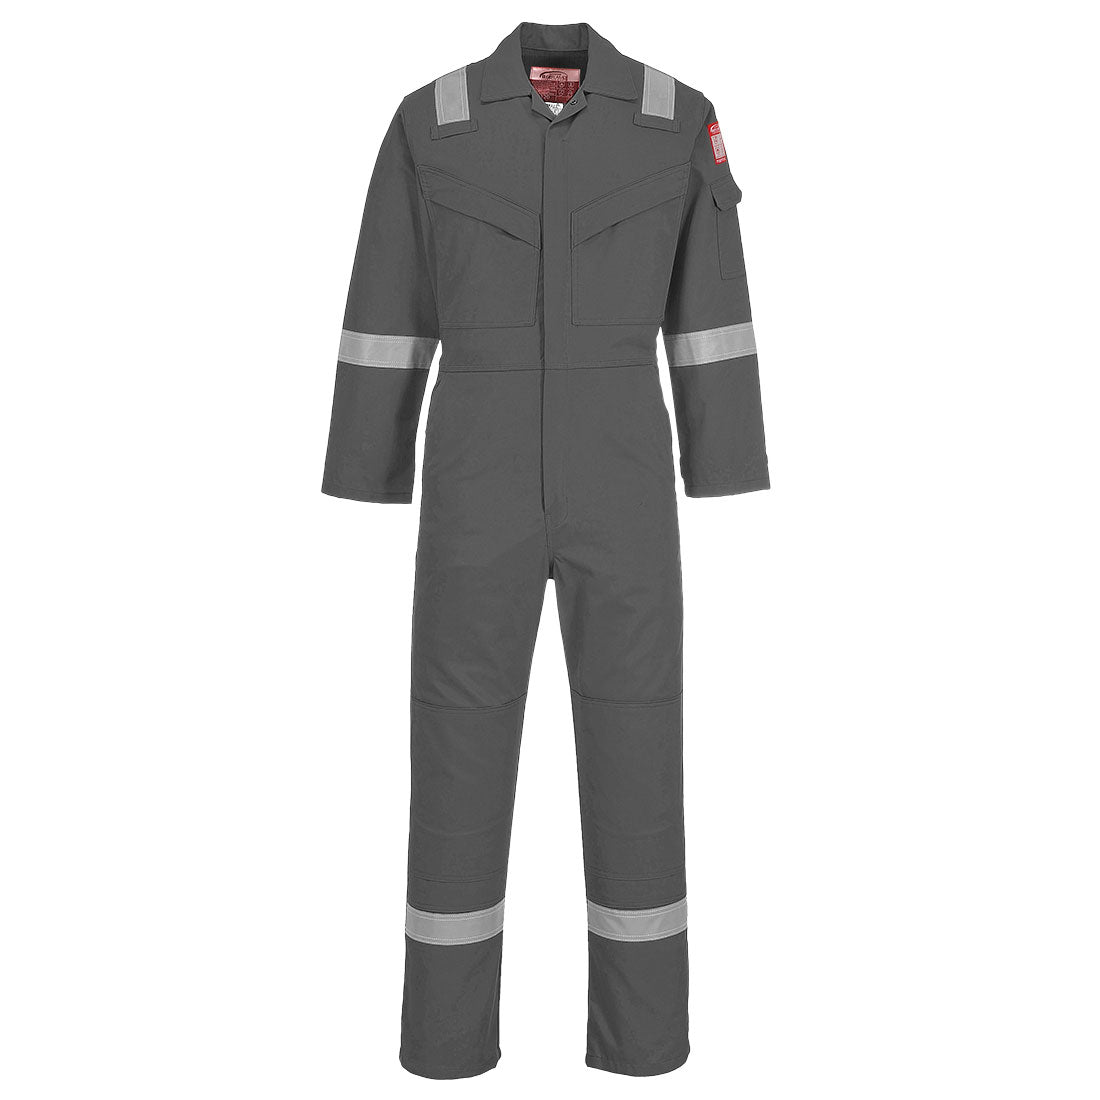 Portwest FR21 Flame Resistant Super Light Weight Anti-Static Coveralls 210g 1#colour_grey